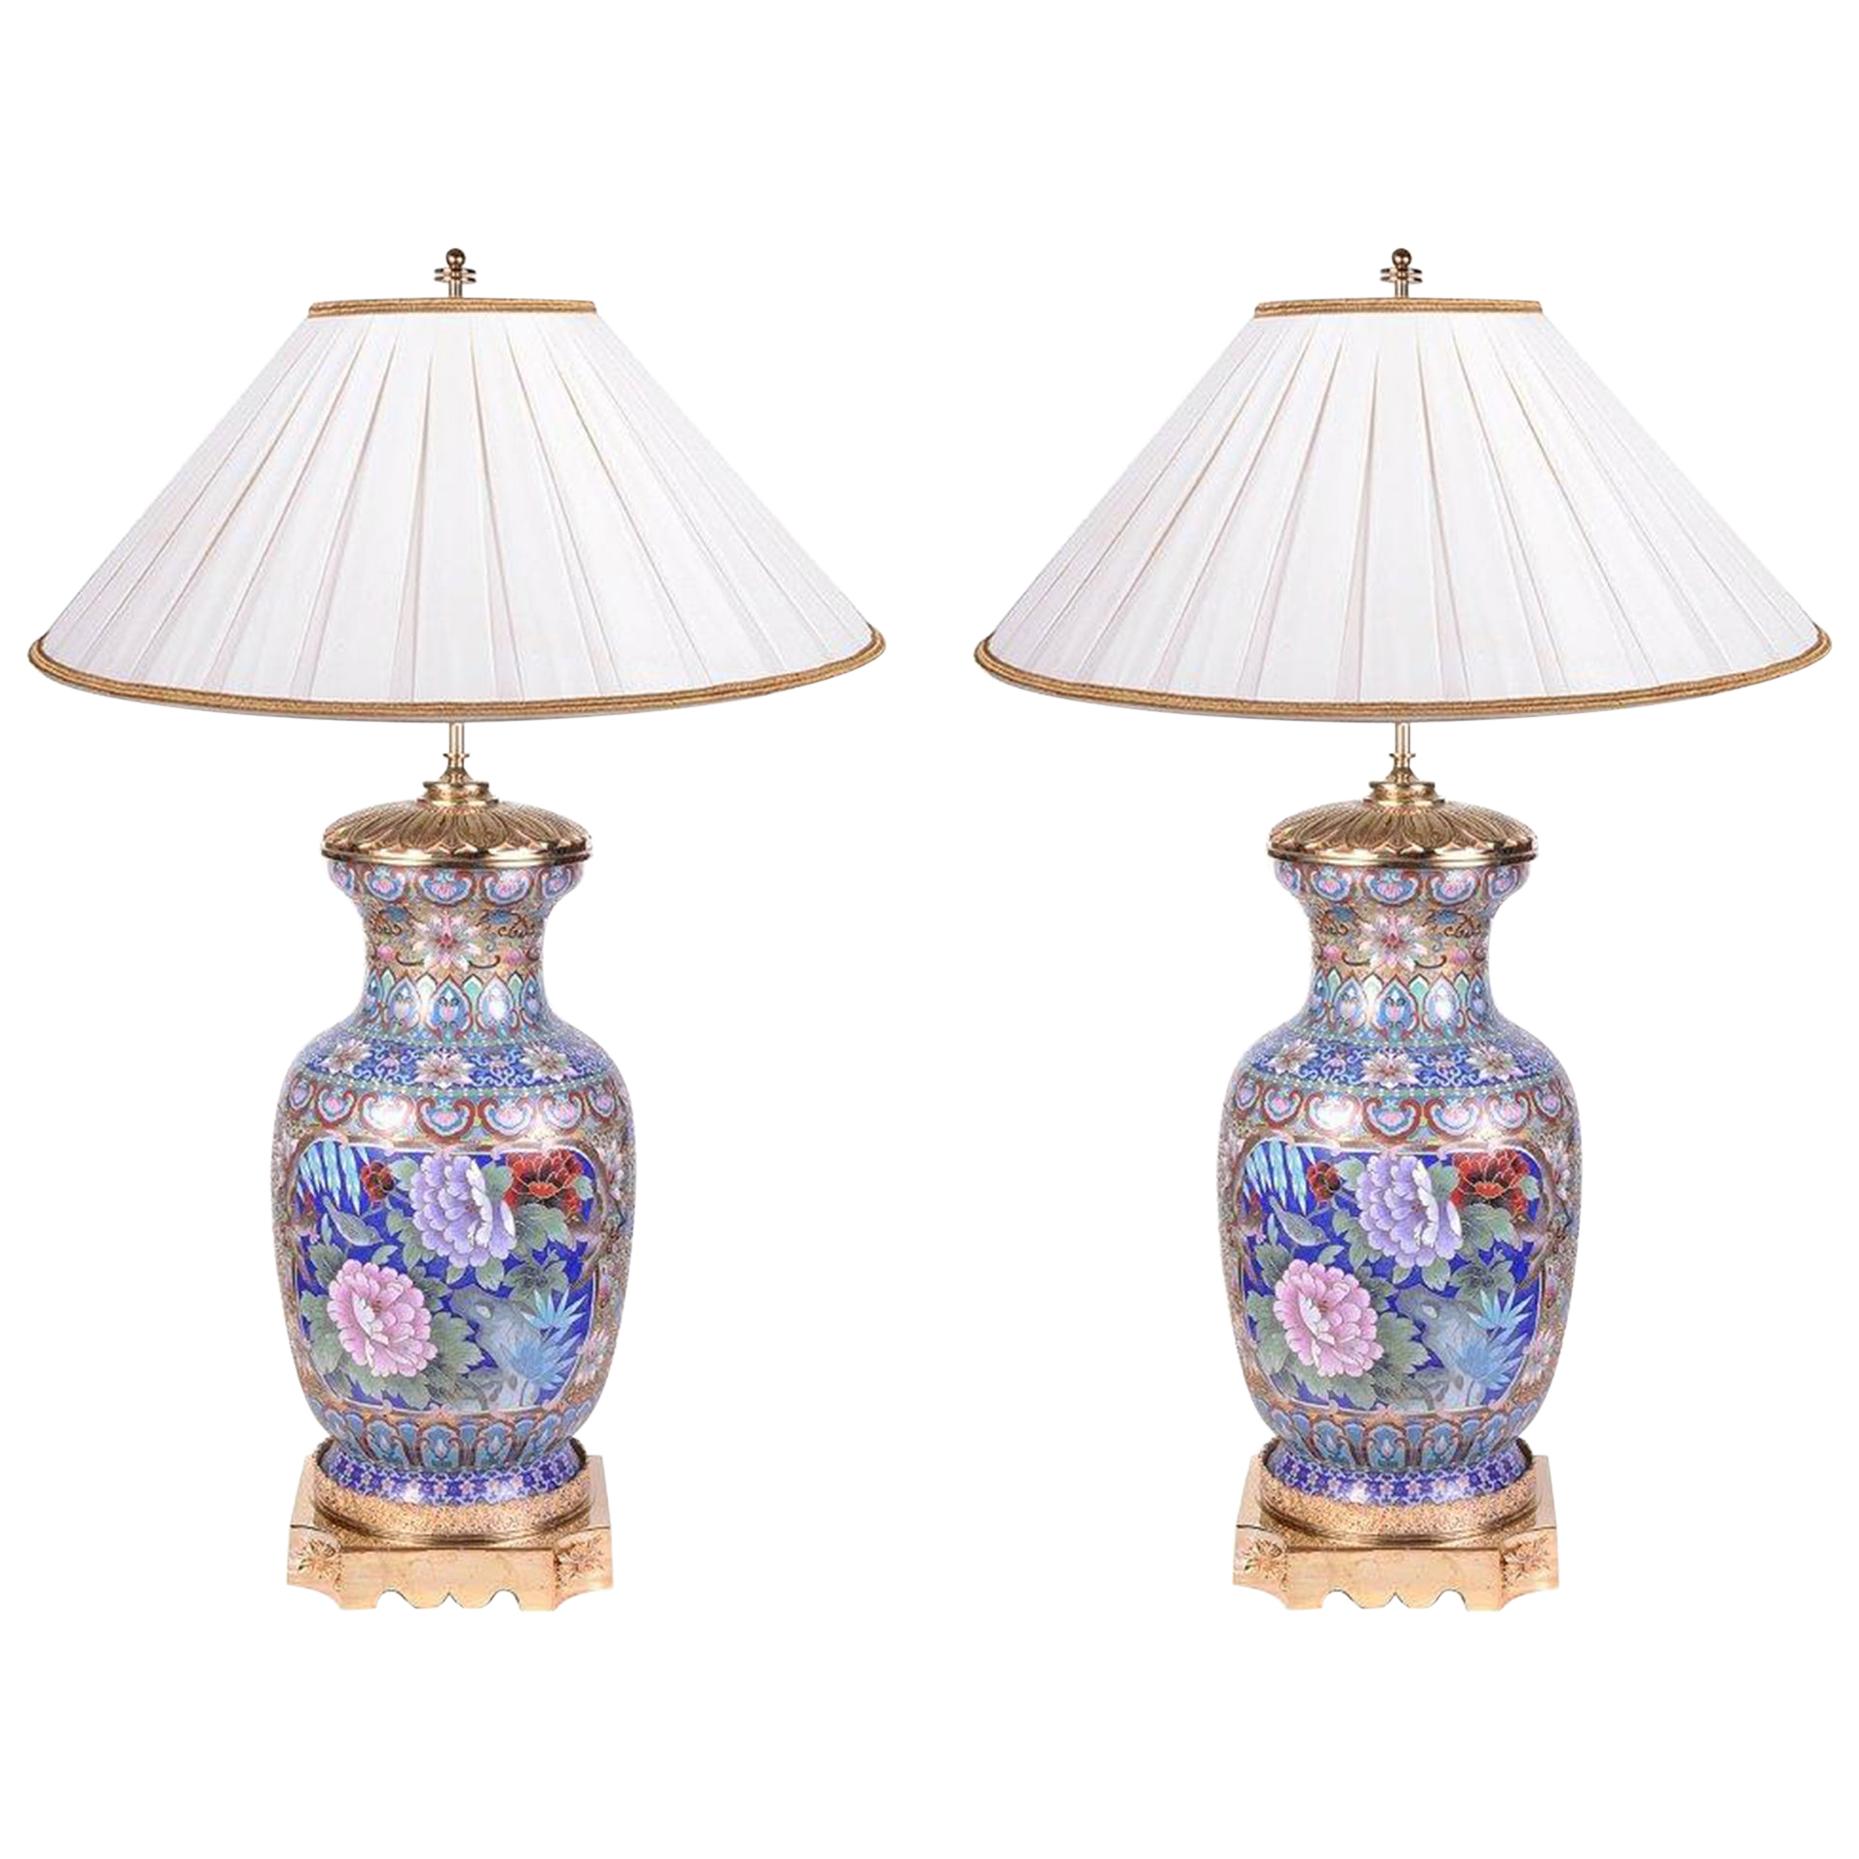 Pair of Early 20th Century Chinese Cloisonne Enamel Vases/Lamps For Sale